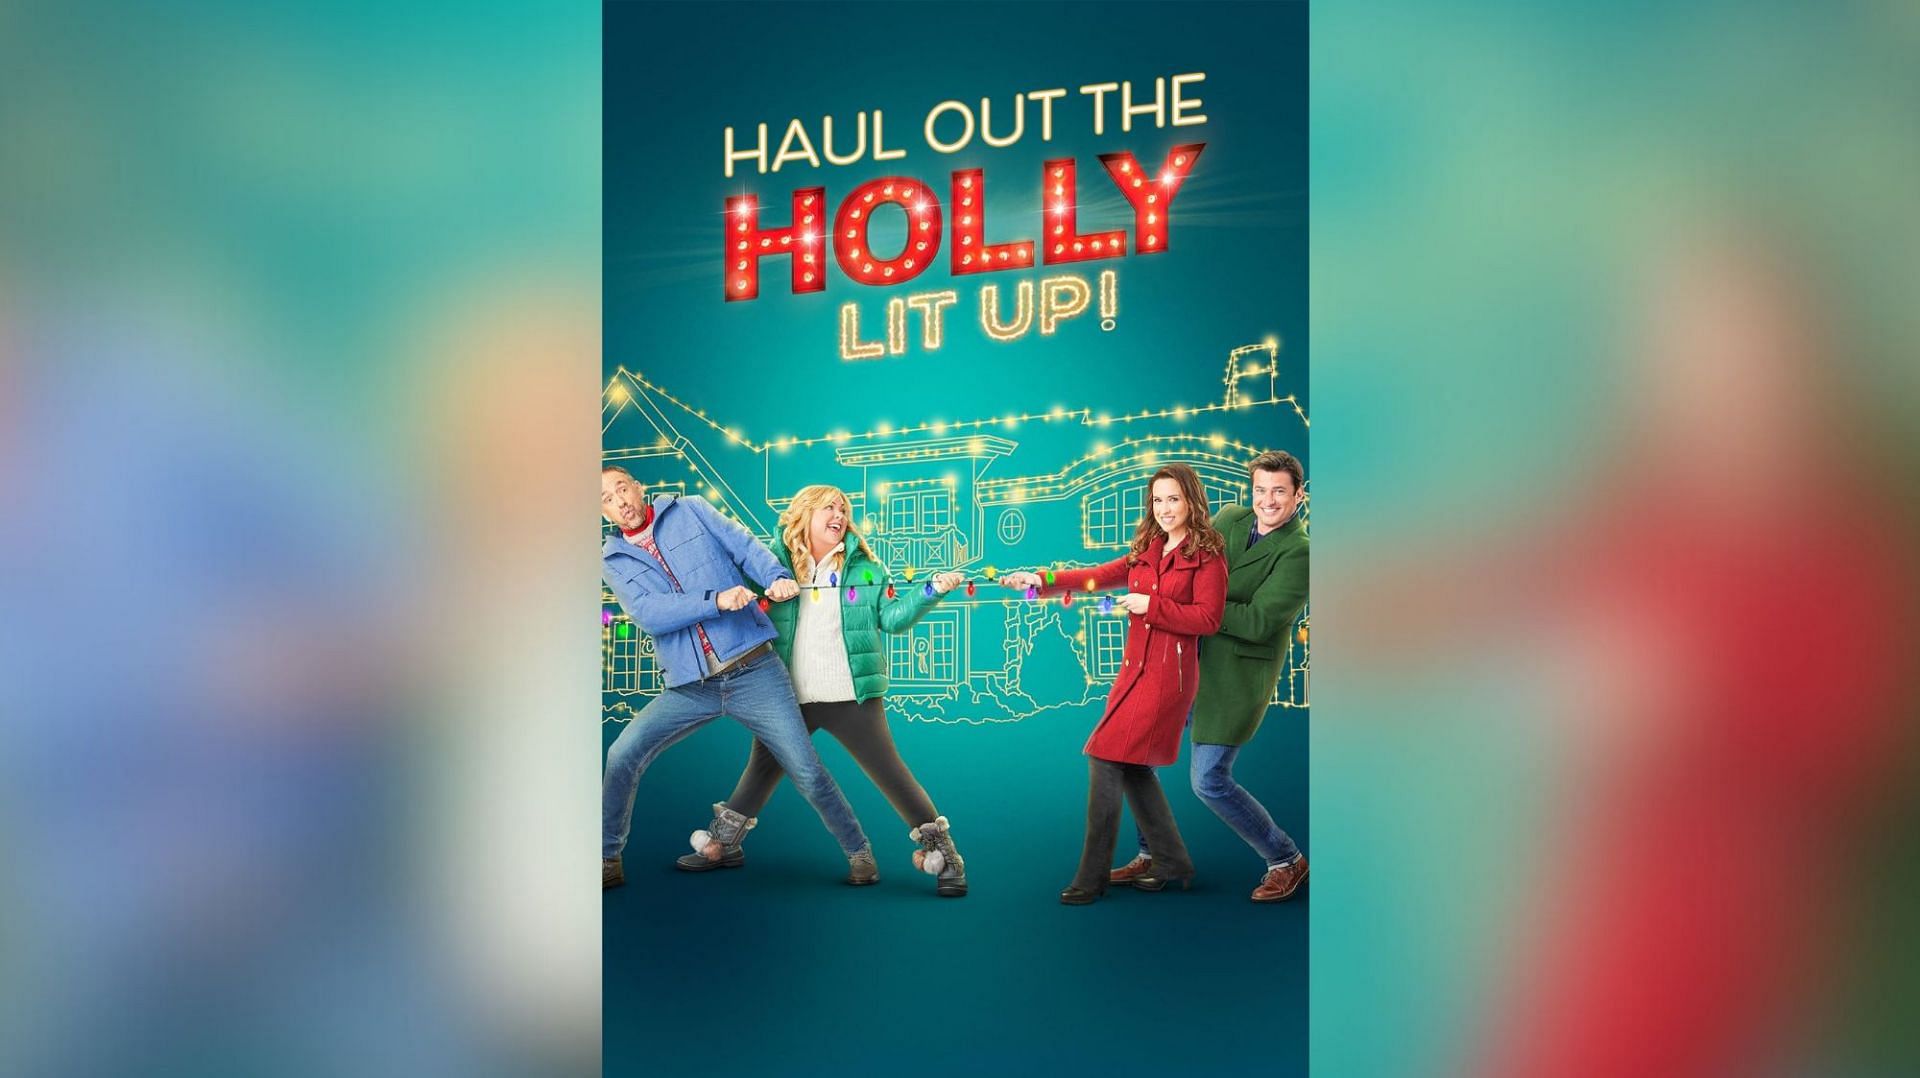 Haul Out the Holly: Lit Up (Image via Hallmark)